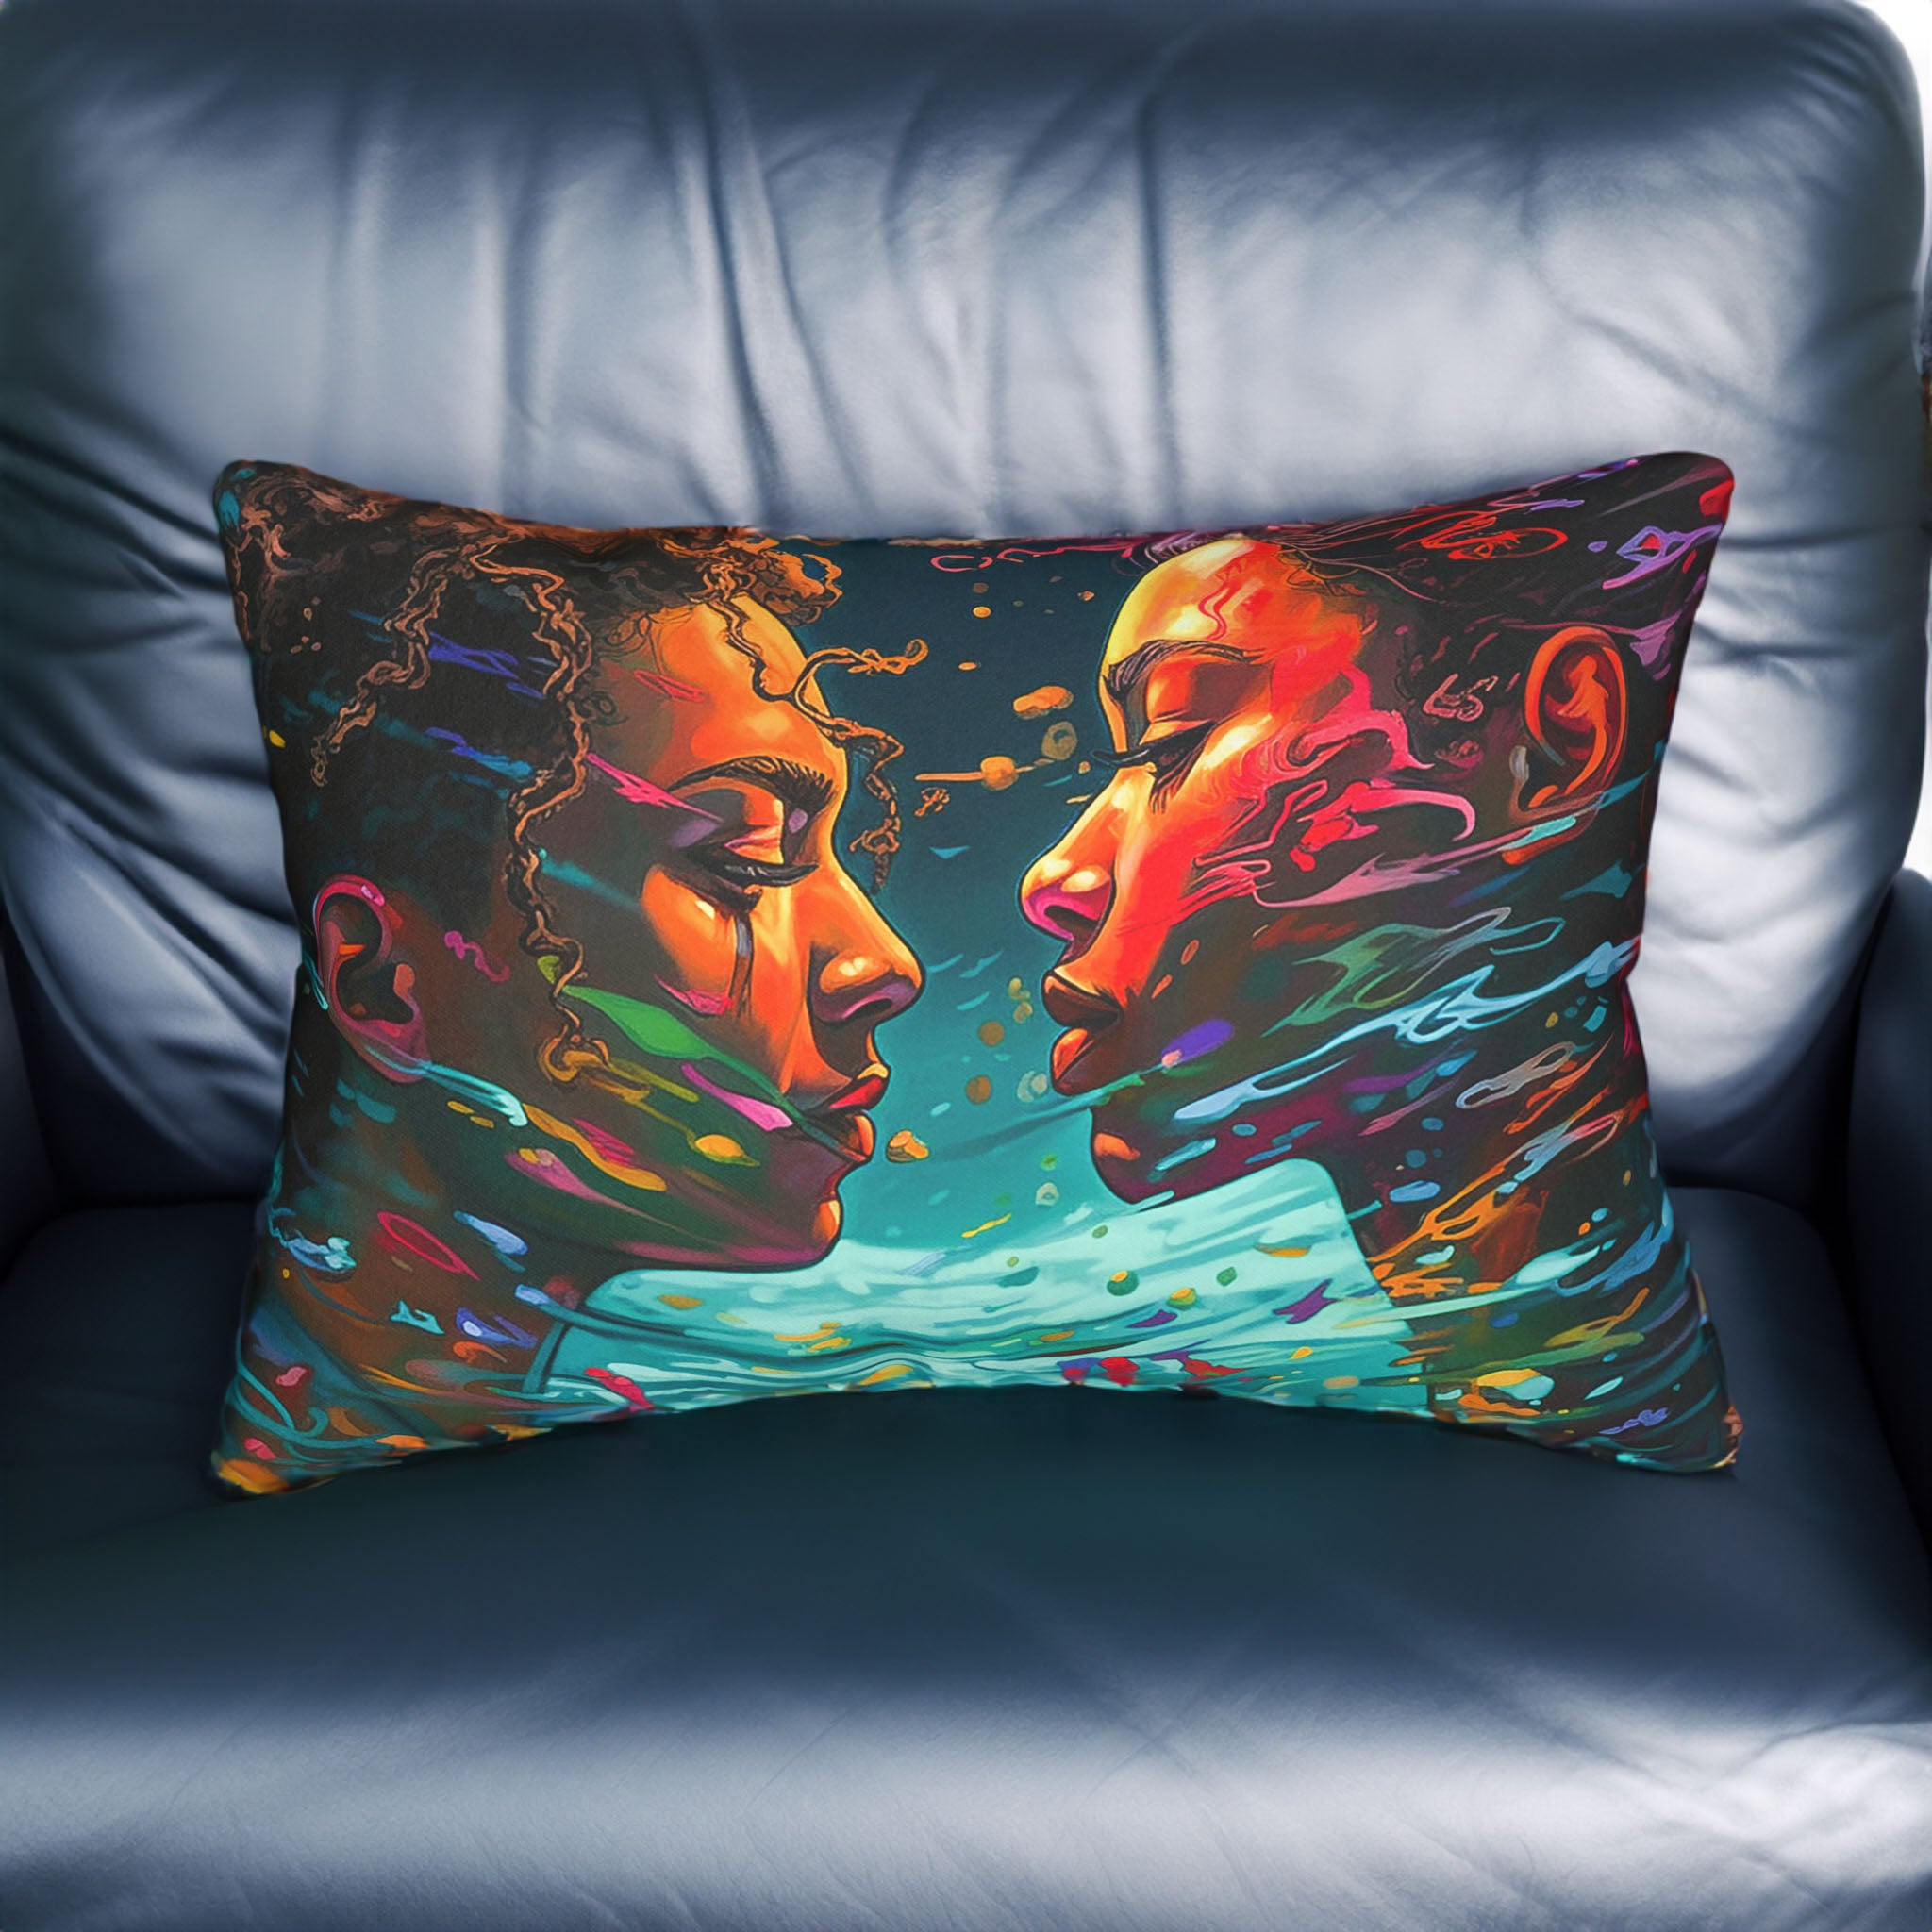 "COLOR OF LOVE" - African American Themed Lumbar Pillow